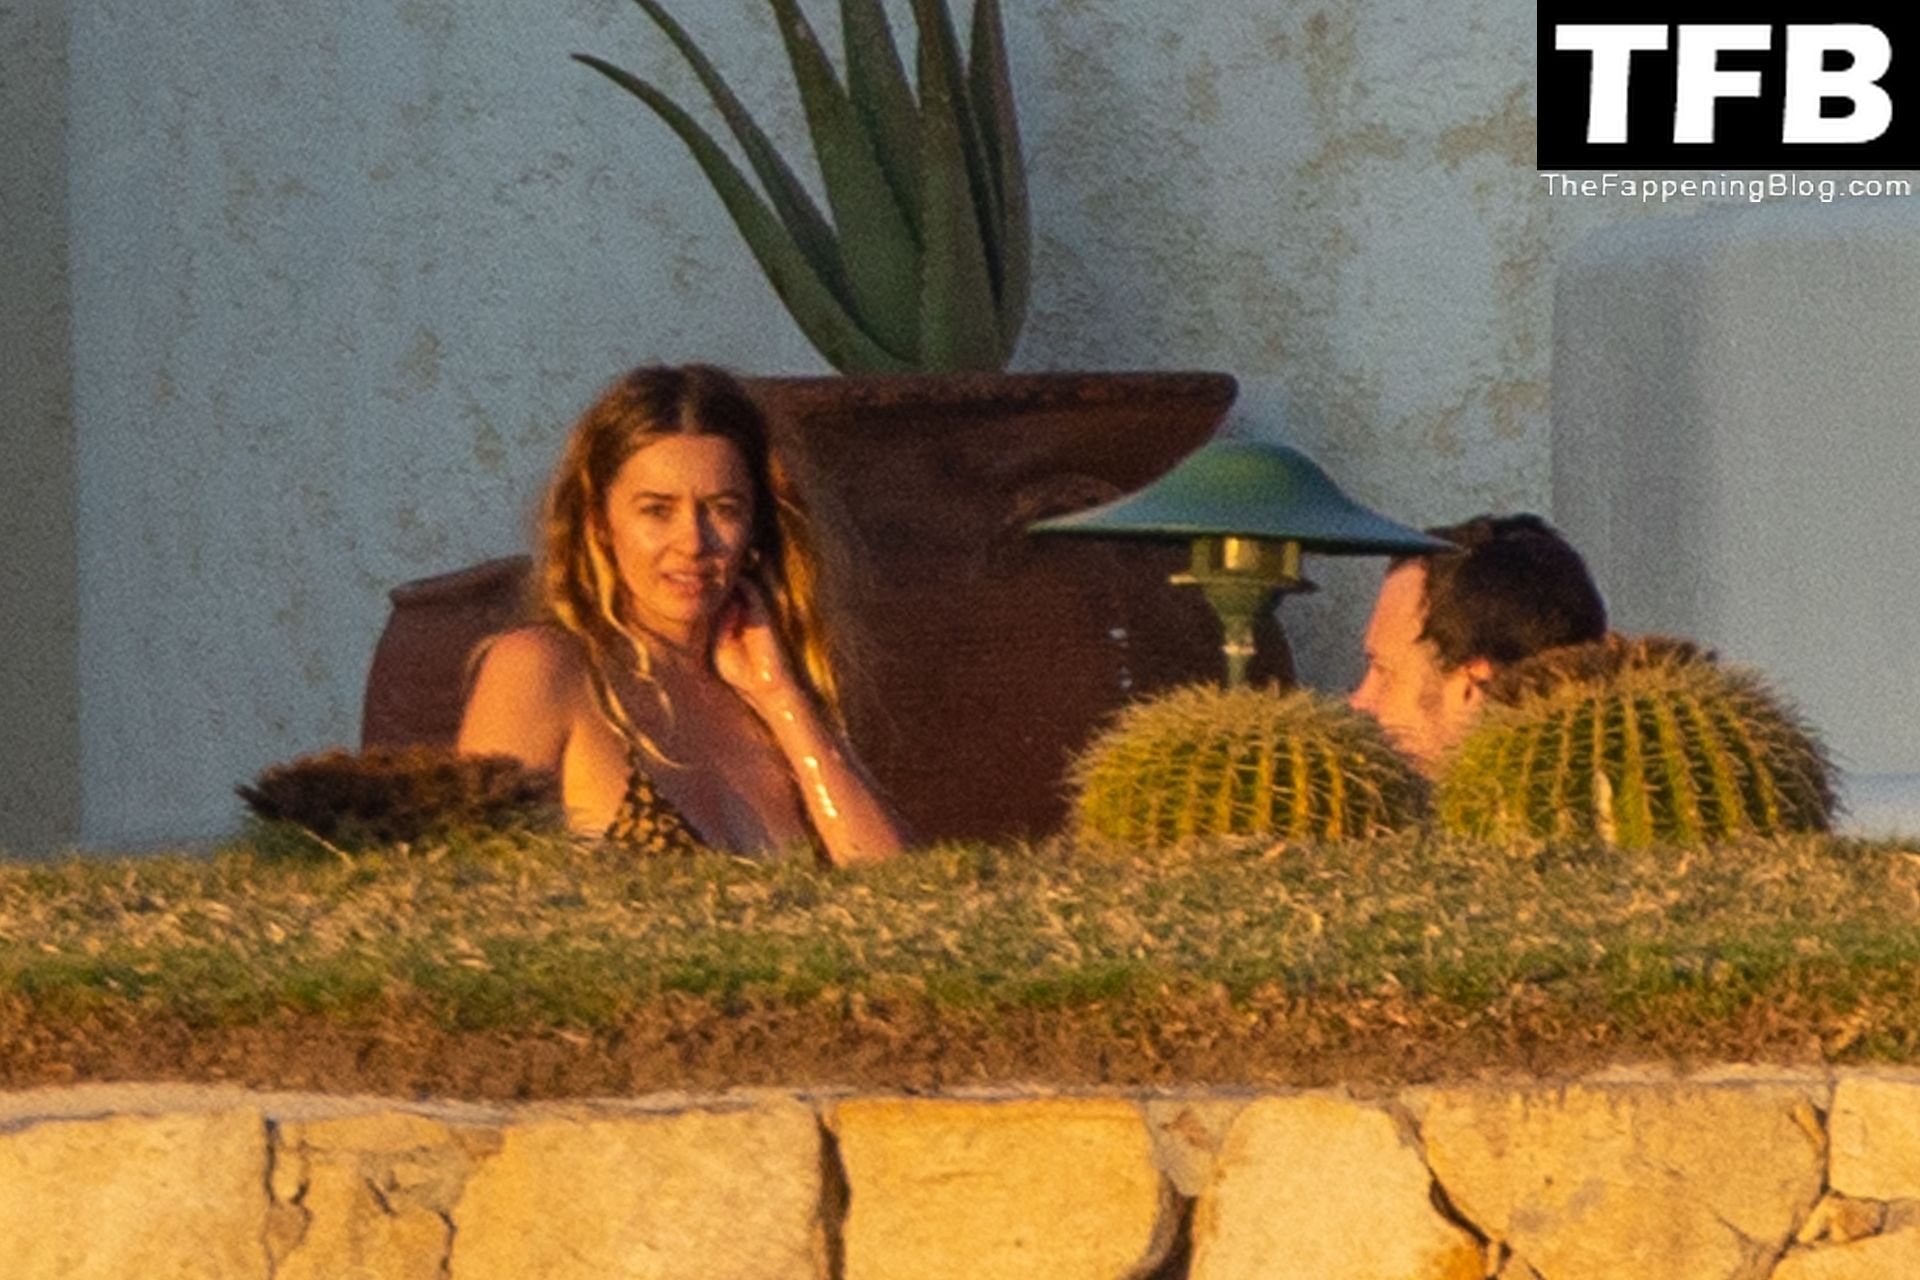 Jason-Sudeikis-and-Keeley-Hazell-have-rekindled-their-romance-as-they-were-spotted-packing-on-the-PDA-during-a-recent-trip-to-Cabo-San-Lucas-Mexico-TFB-12.jpg